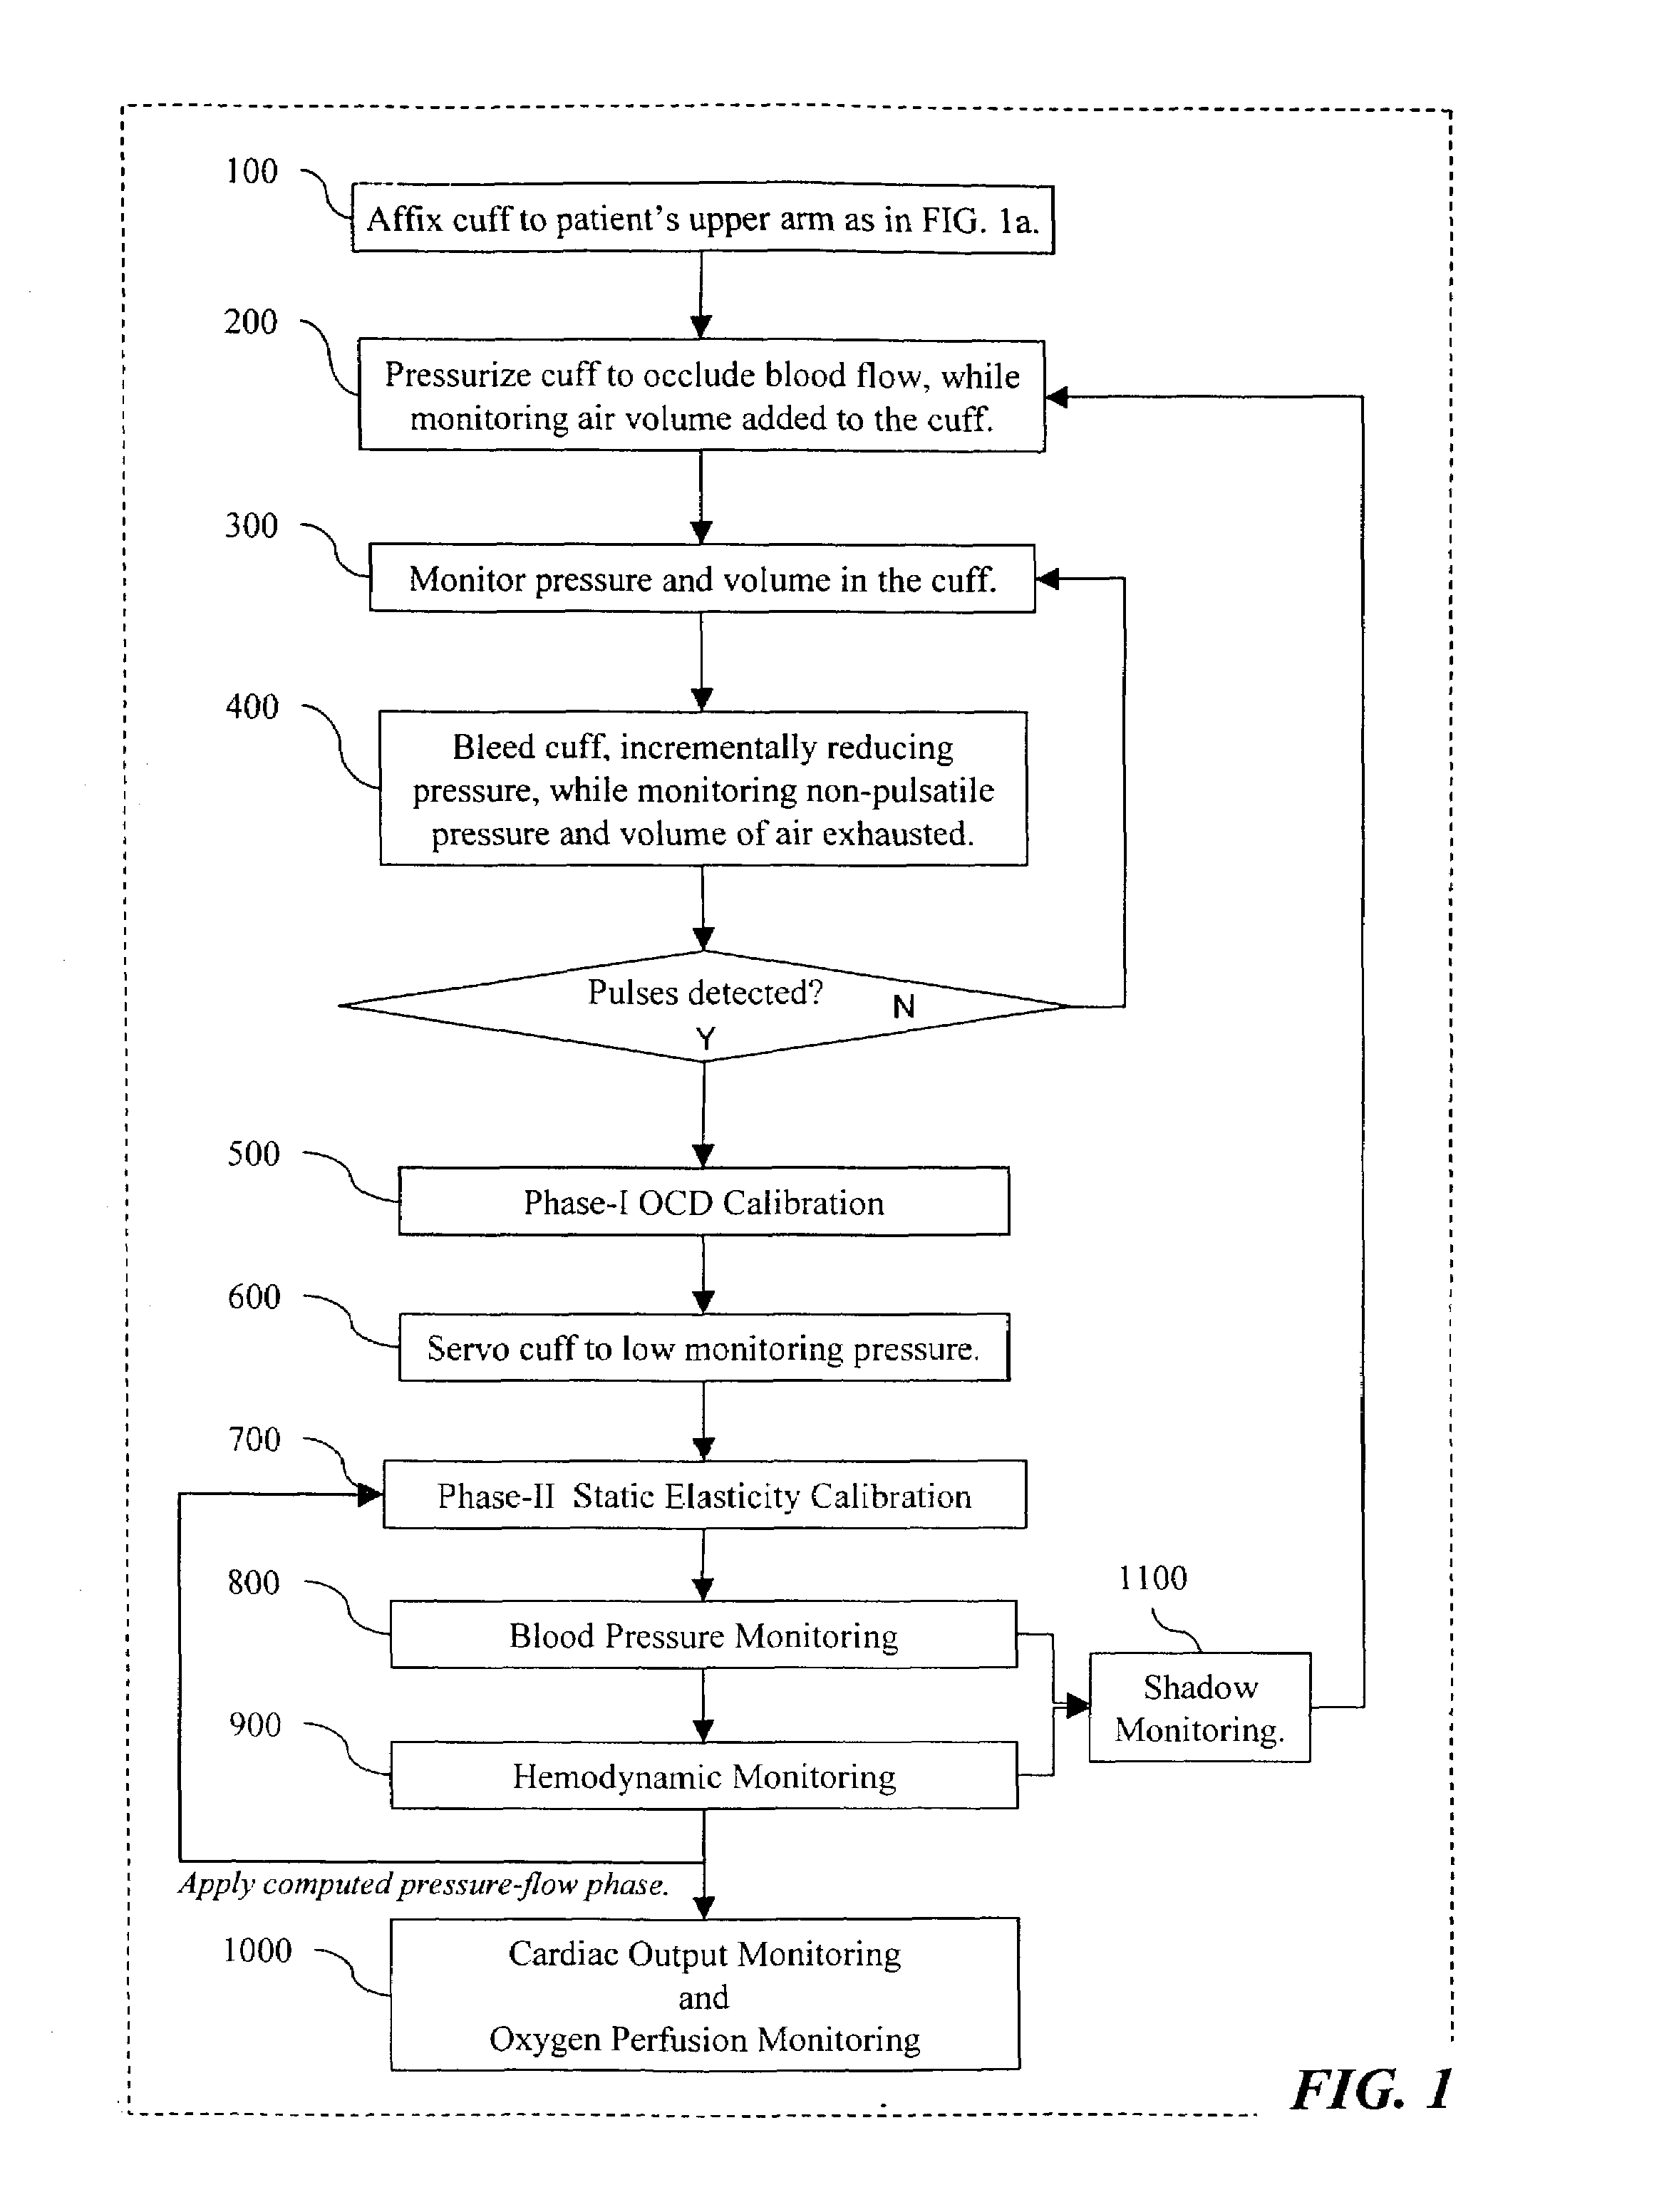 Methods, apparatus and articles-of-manufacture for noninvasive measurement and monitoring of peripheral blood flow, perfusion, cardiac output biophysic stress and cardiovascular condition